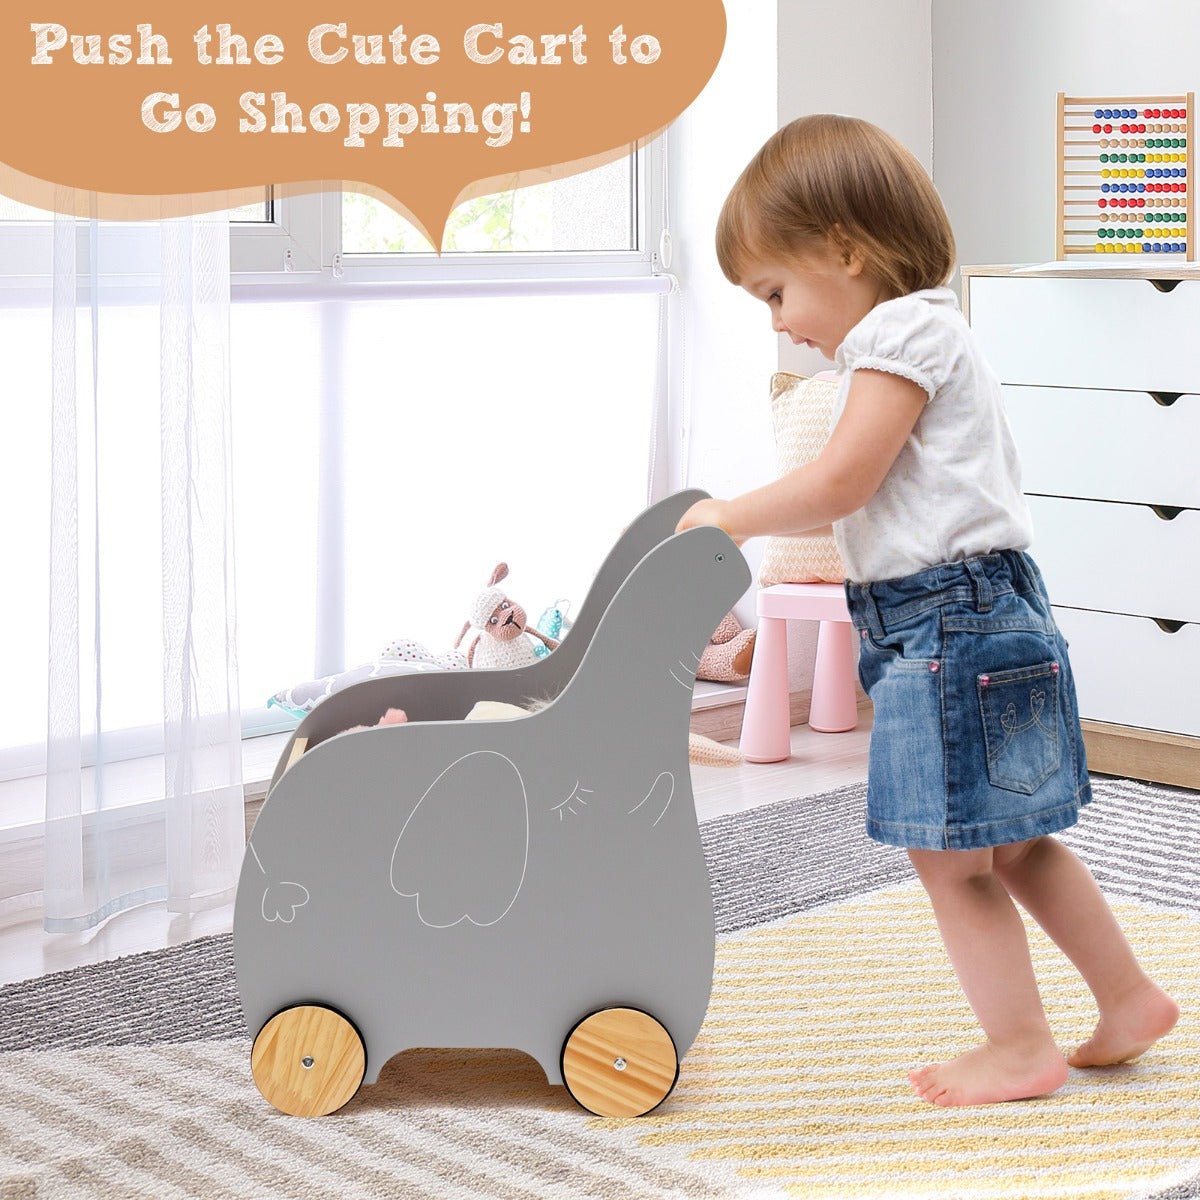 Kid's Wood Shopping Cart - Rubber Wheels, Imaginative Grocery Play